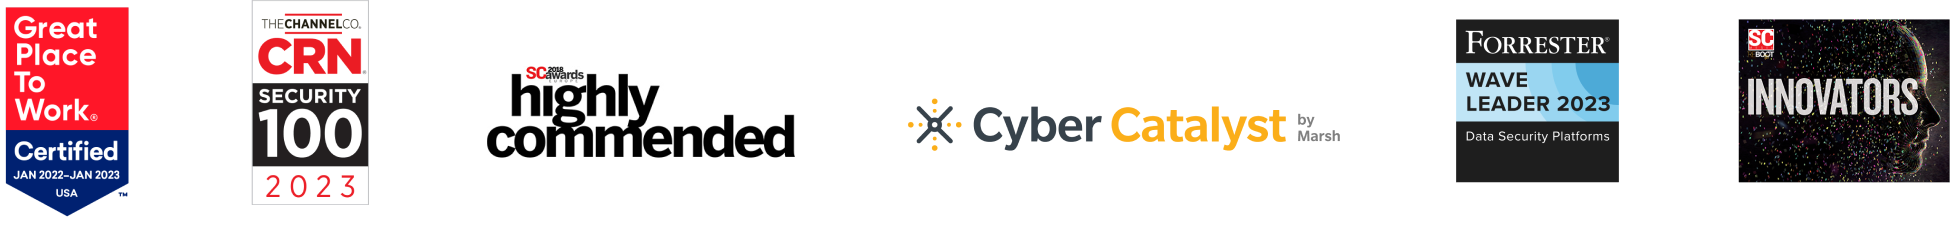 CRN logos with Cyber Catalyst logo